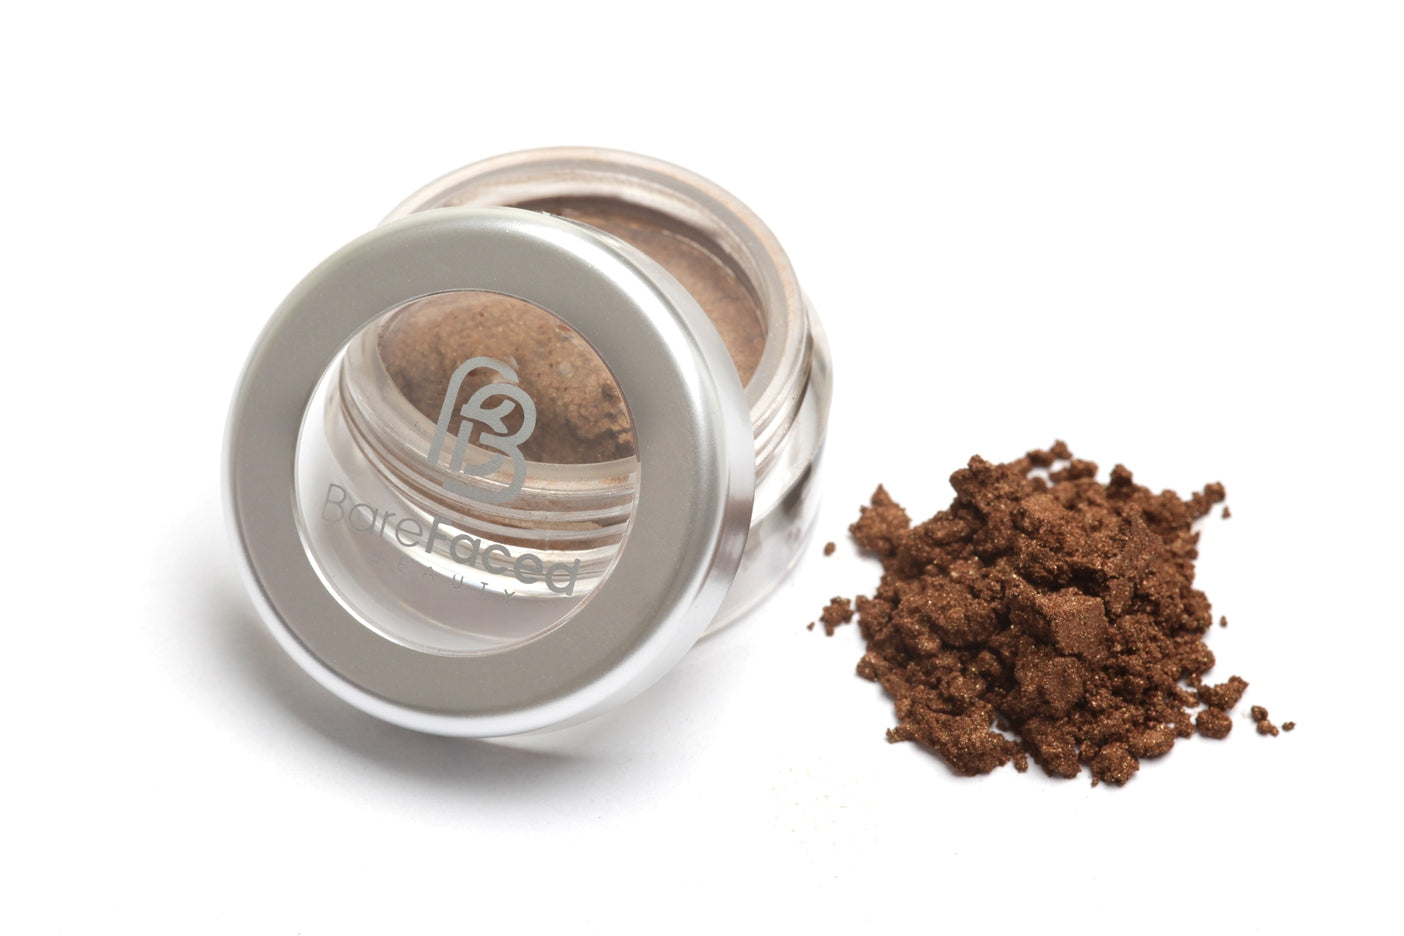 A small round pot of mineral eyeshadow, with a swatch of the powder next to it showing a shimmery medium dark brown shade